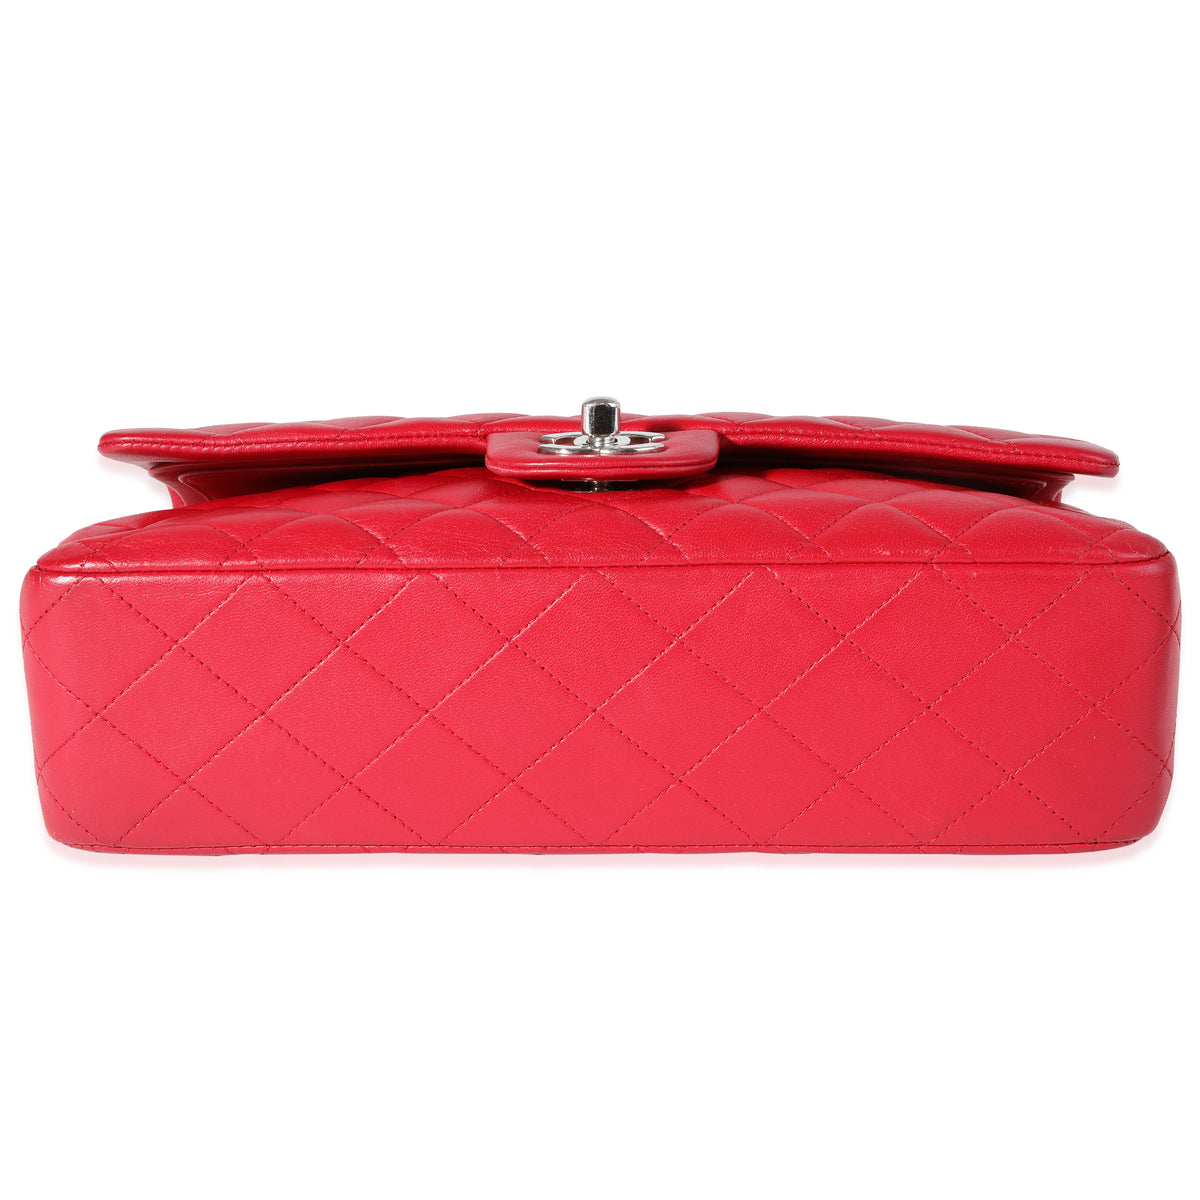 Chanel Vintage Classic Double Flap Lambskin Medium Bag in Lipstick Red with  Gold Hardware